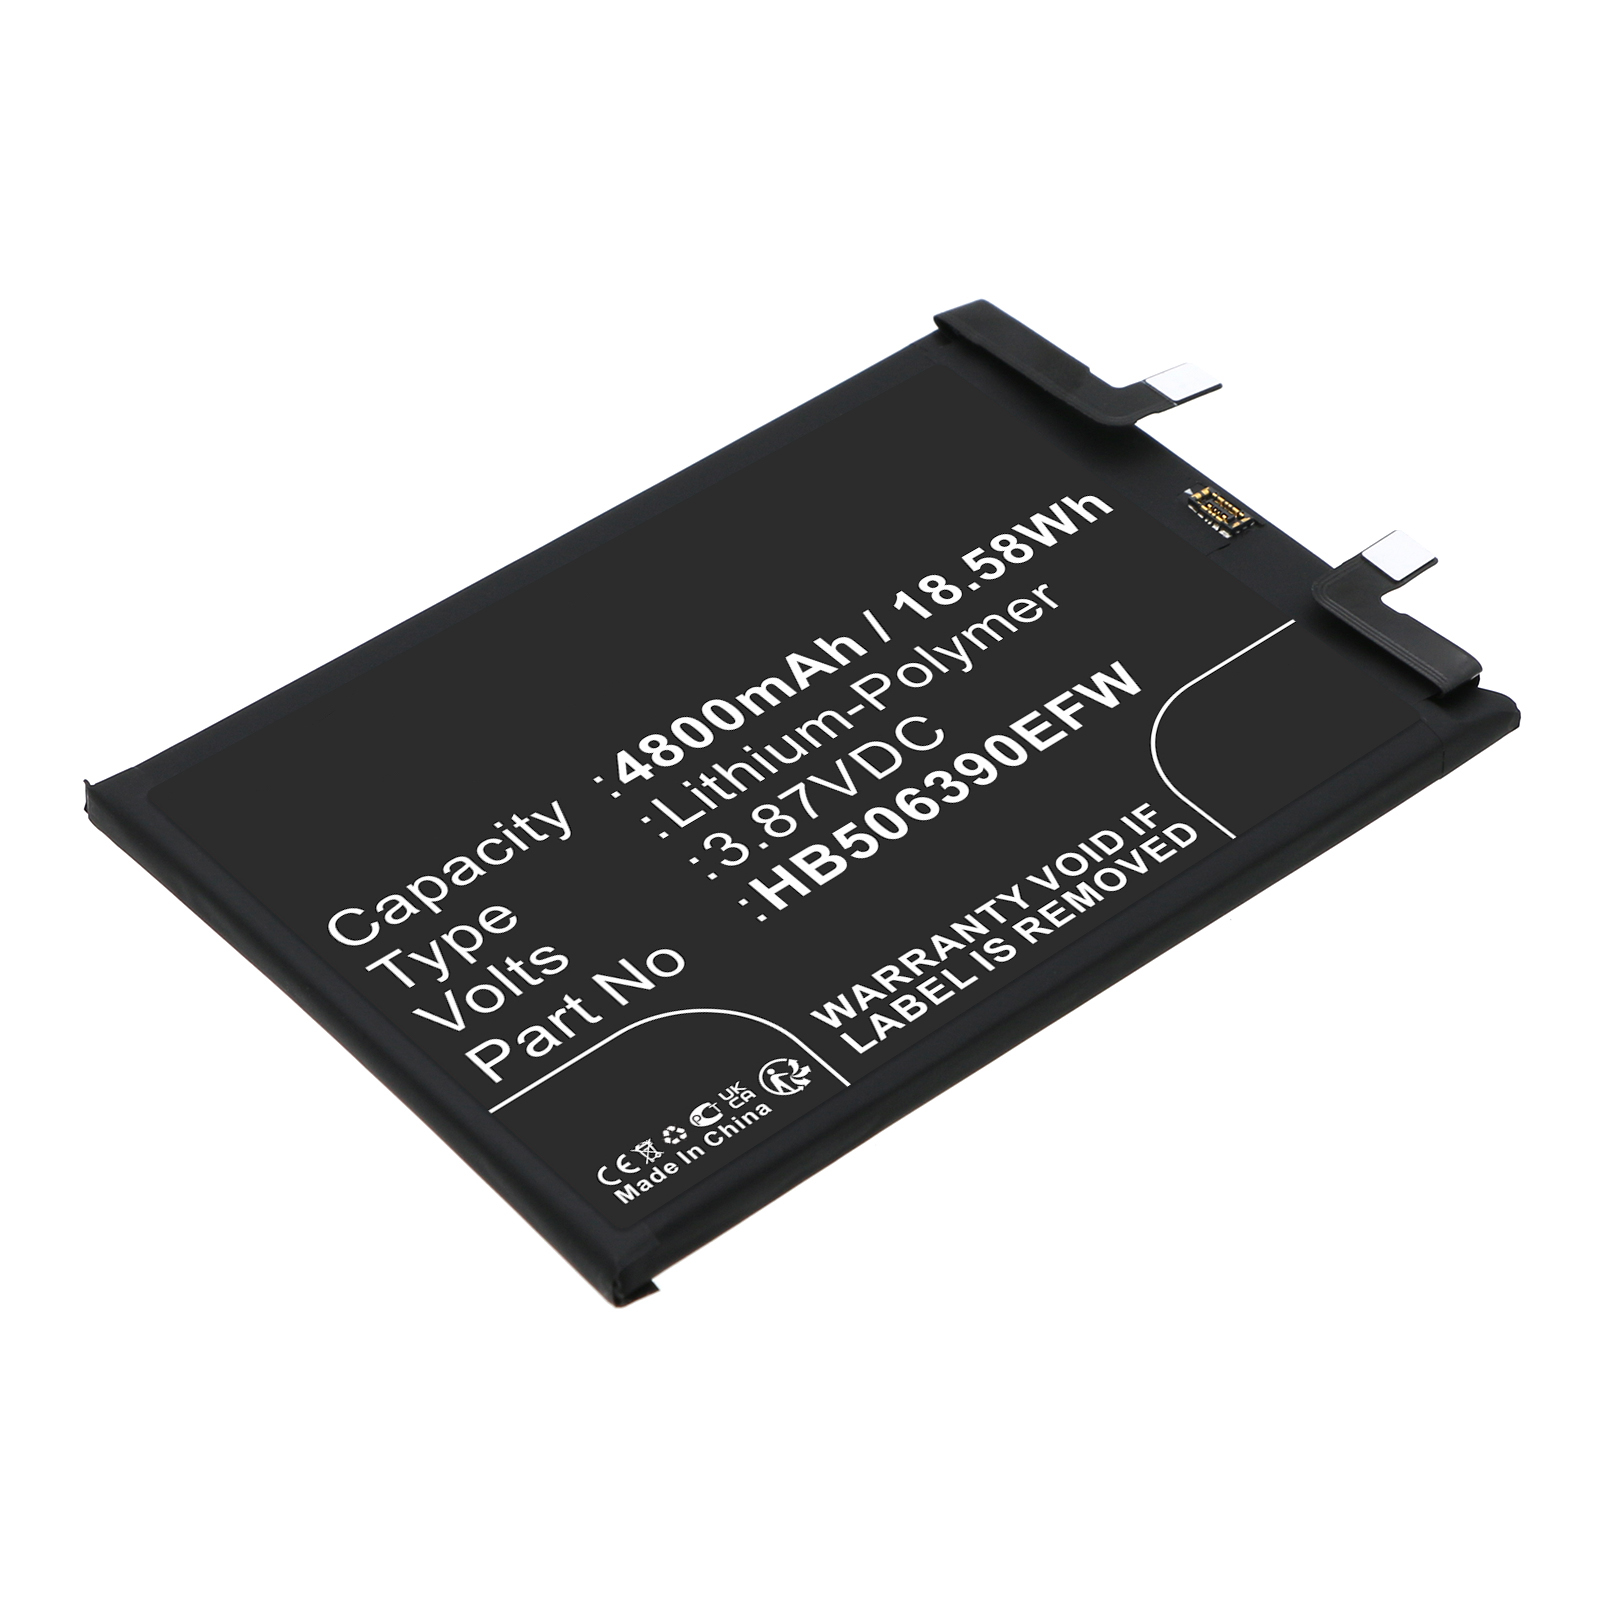 Synergy Digital Cell Phone Battery, Compatible with Honor HB506390EFW Cell Phone Battery (Li-Pol, 3.87V, 4800mAh)